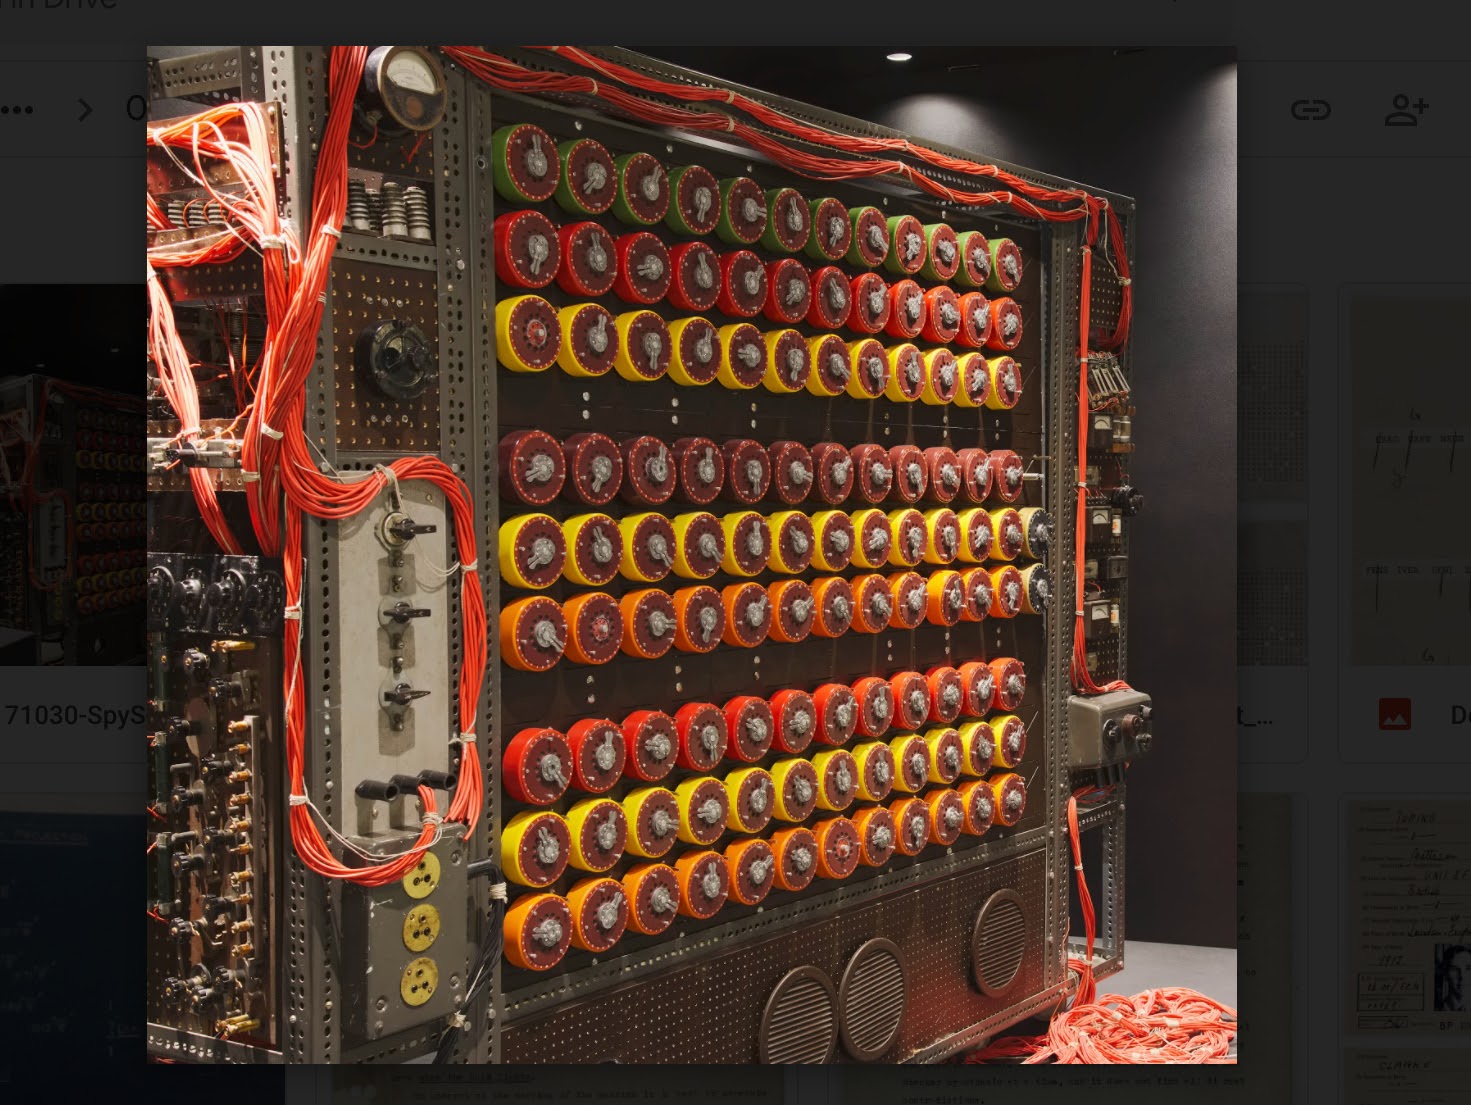 The Bombe machine used in The Imitation Game